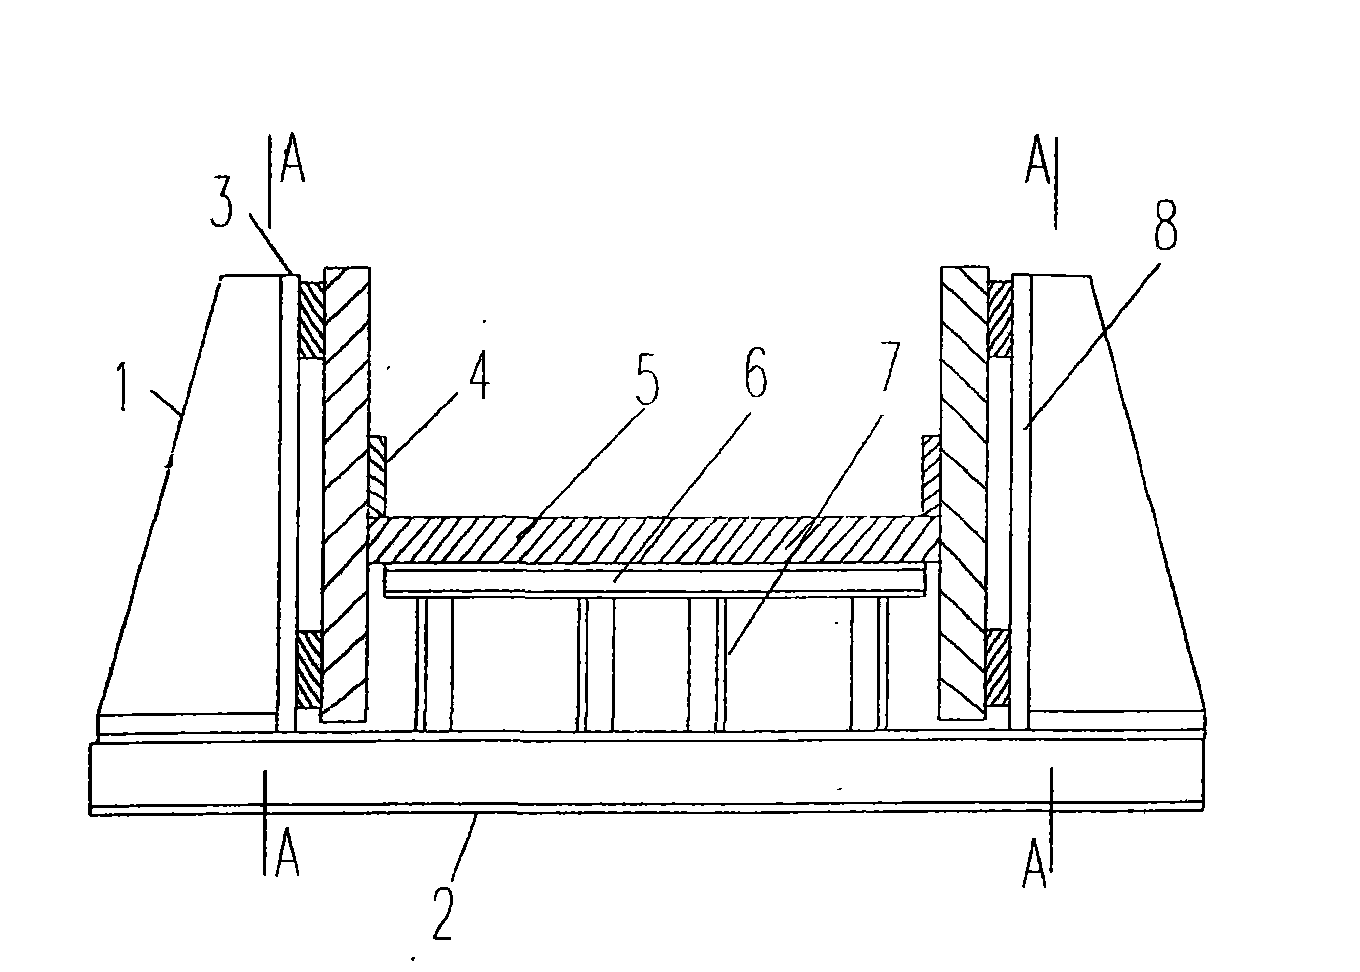 Pairing method of H-section steel for super-large crane beams